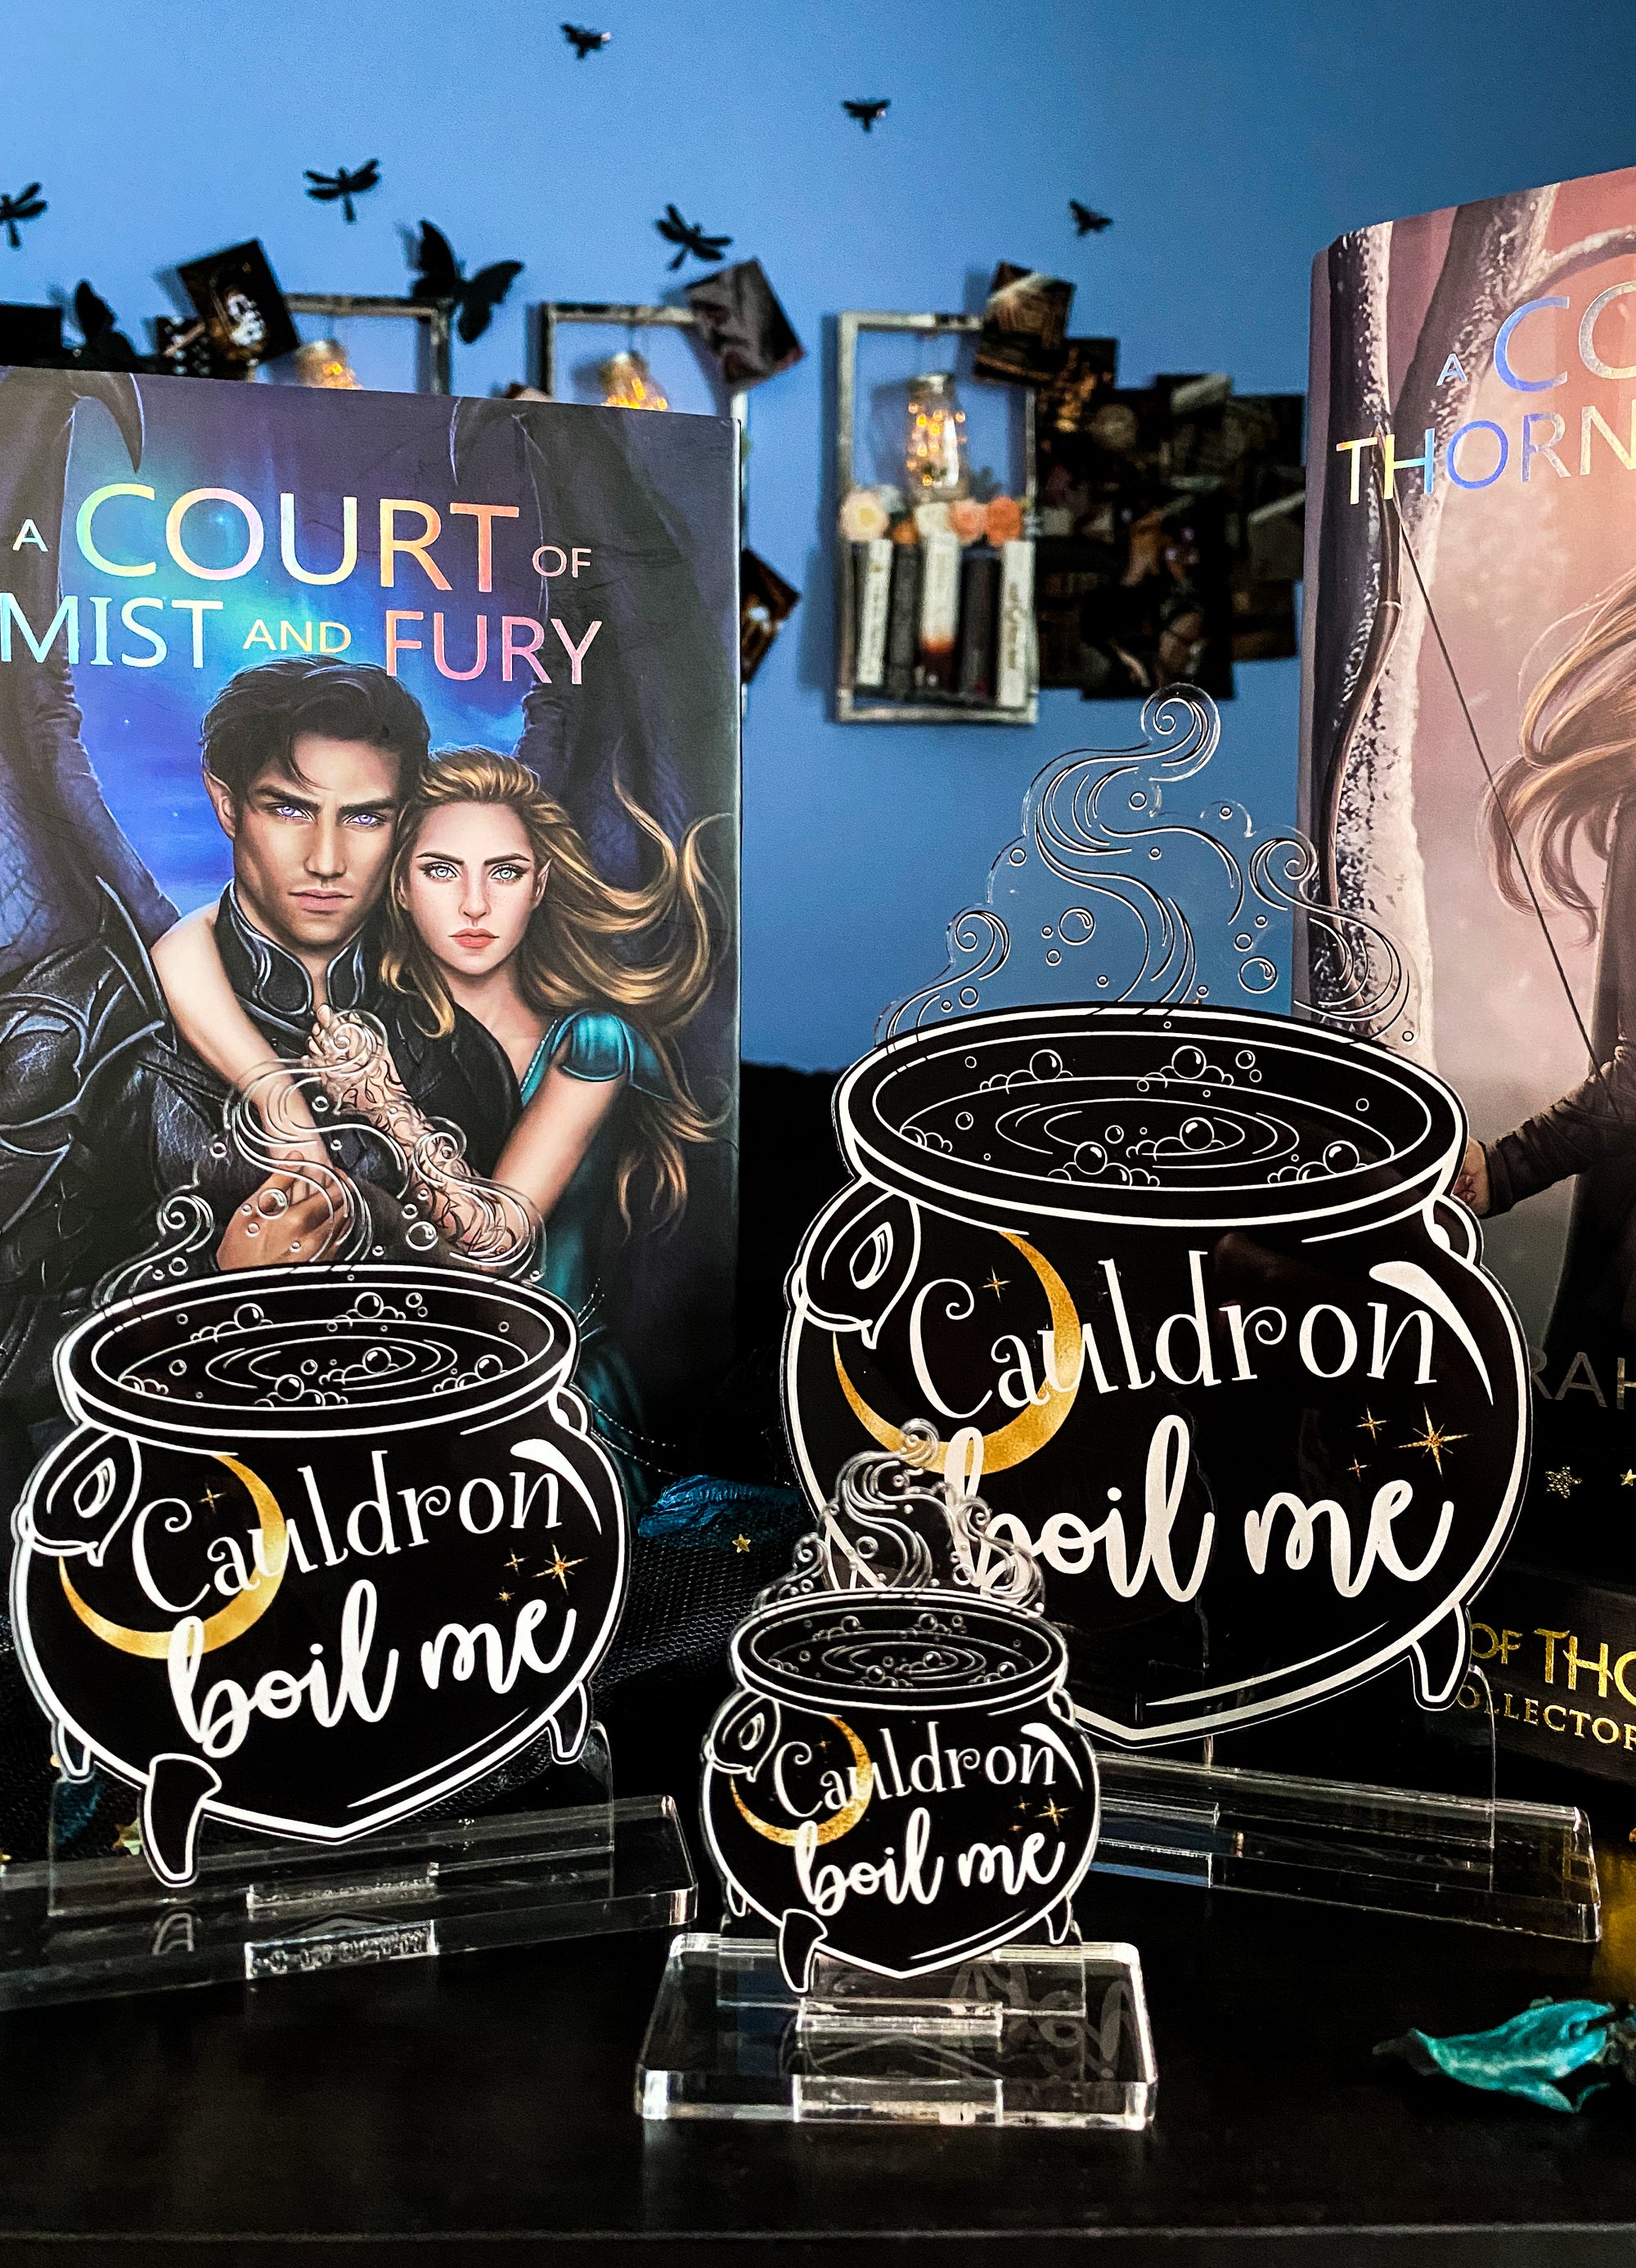 "Cauldron Boil Me" - A Court of Thorns and Roses Series - Freestanding Bookshelf / Desktop Acrylic Accessory - Officially licensed by Sarah J. Maas - D11